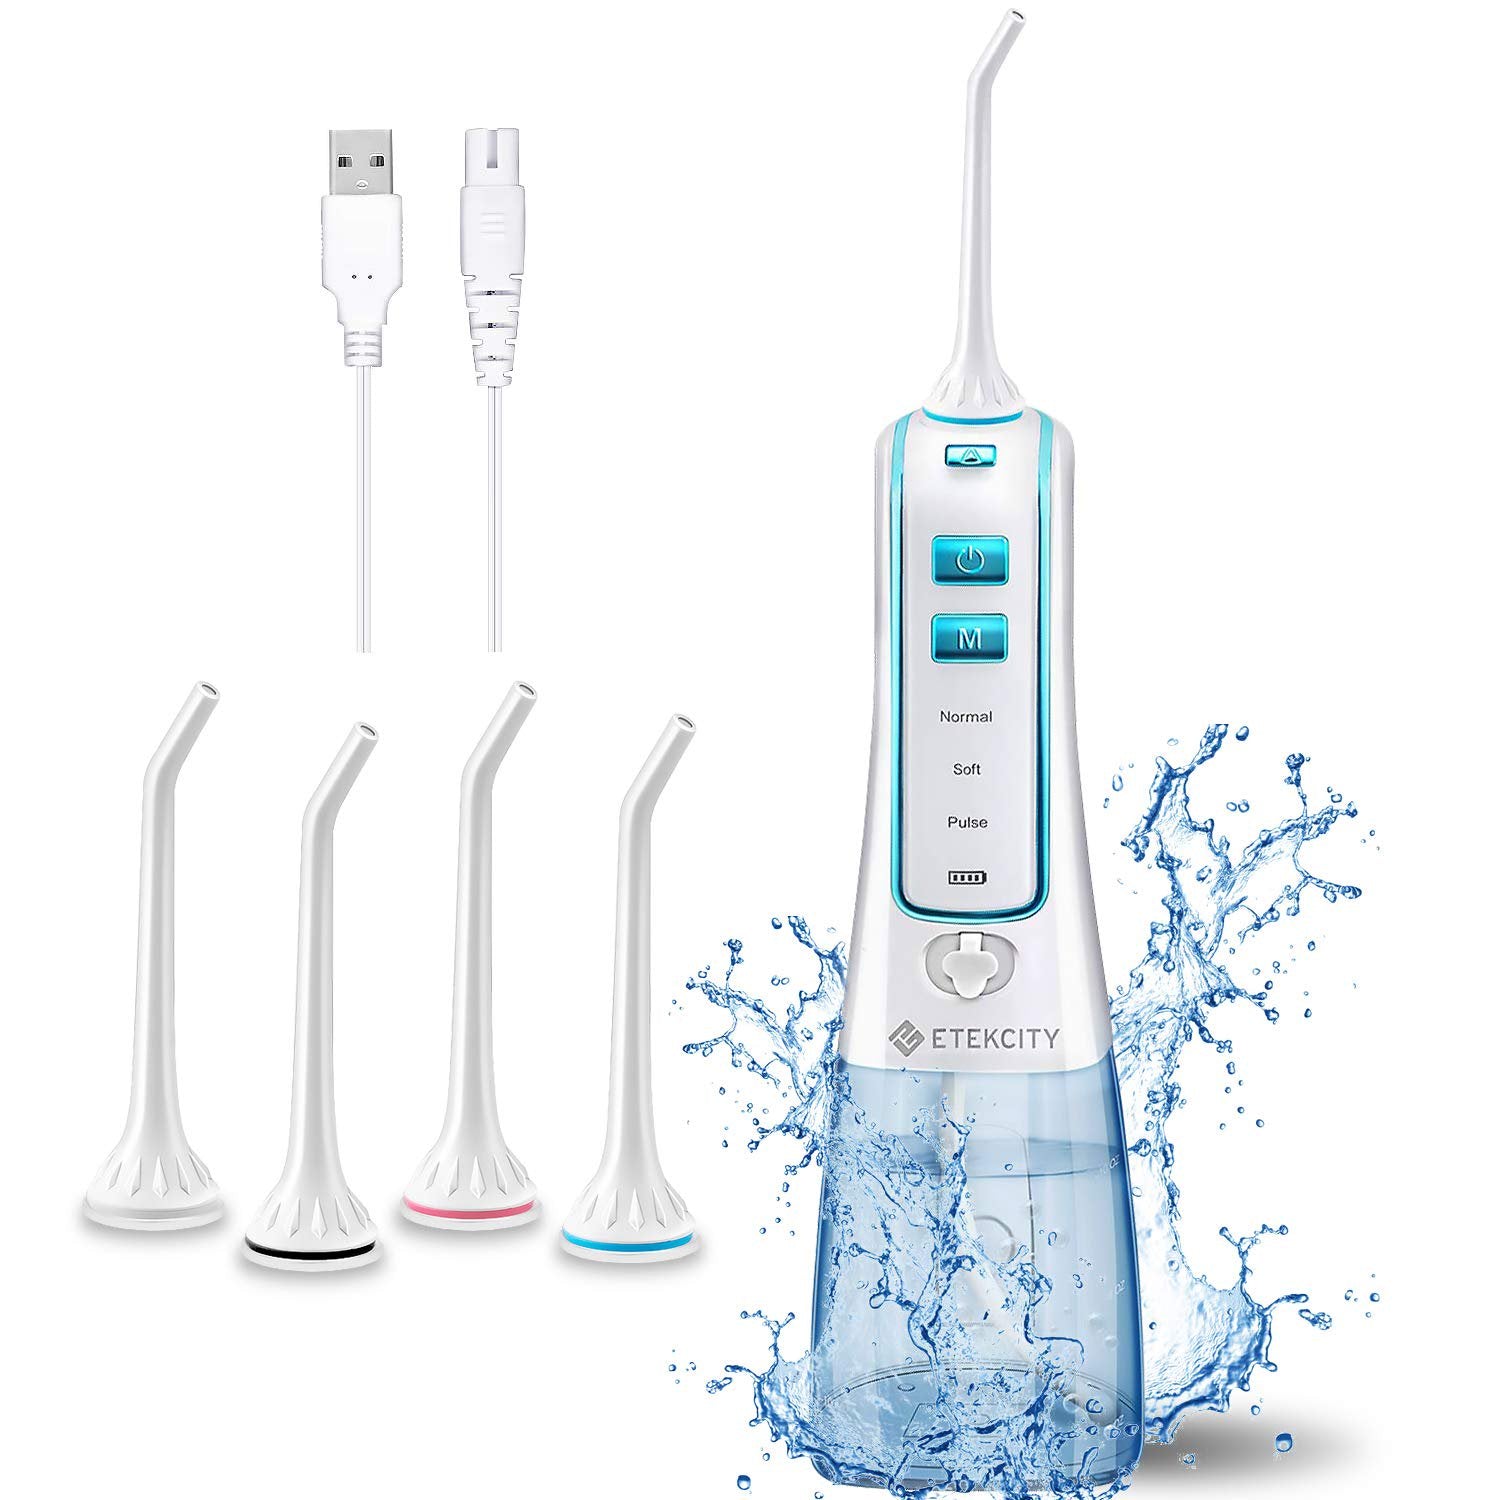 Etekcity Cordless Water Flosser, USB Rechargeable Dental Oral Irrigator, 300 ml Portable Waterproof Teeth Cleaner for Home and Travel - image 1 of 5